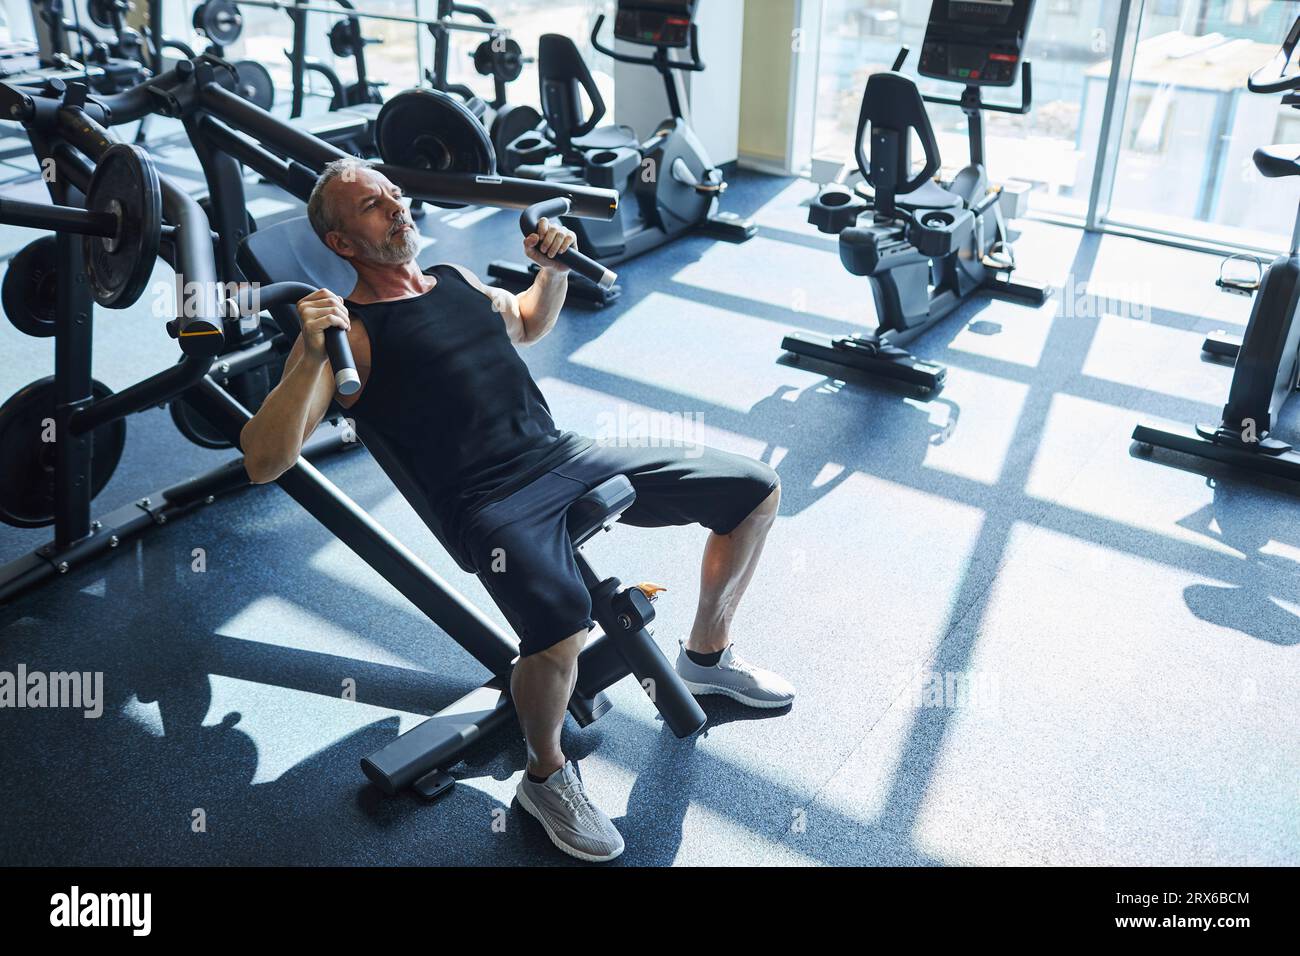 Mature man doing strength training exercise in gym Stock Photo